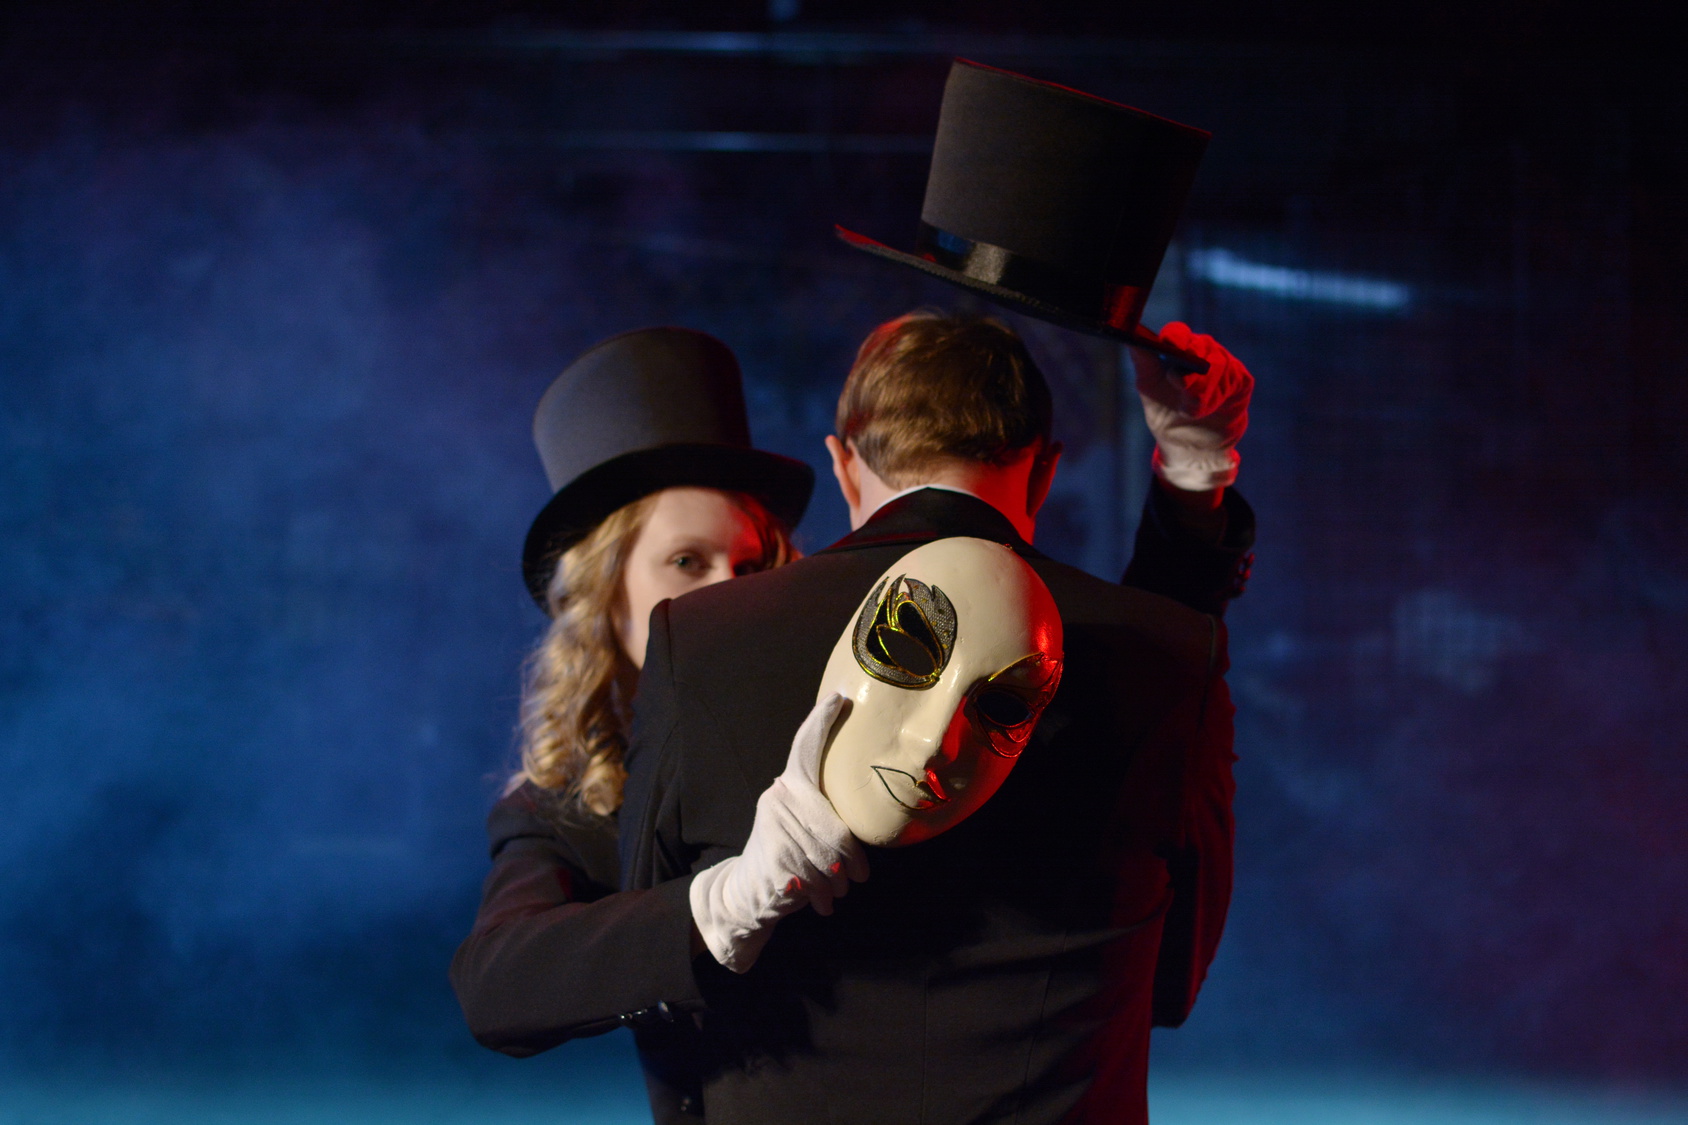 man and woman dancing in tuxedos and holding a theatrical mask